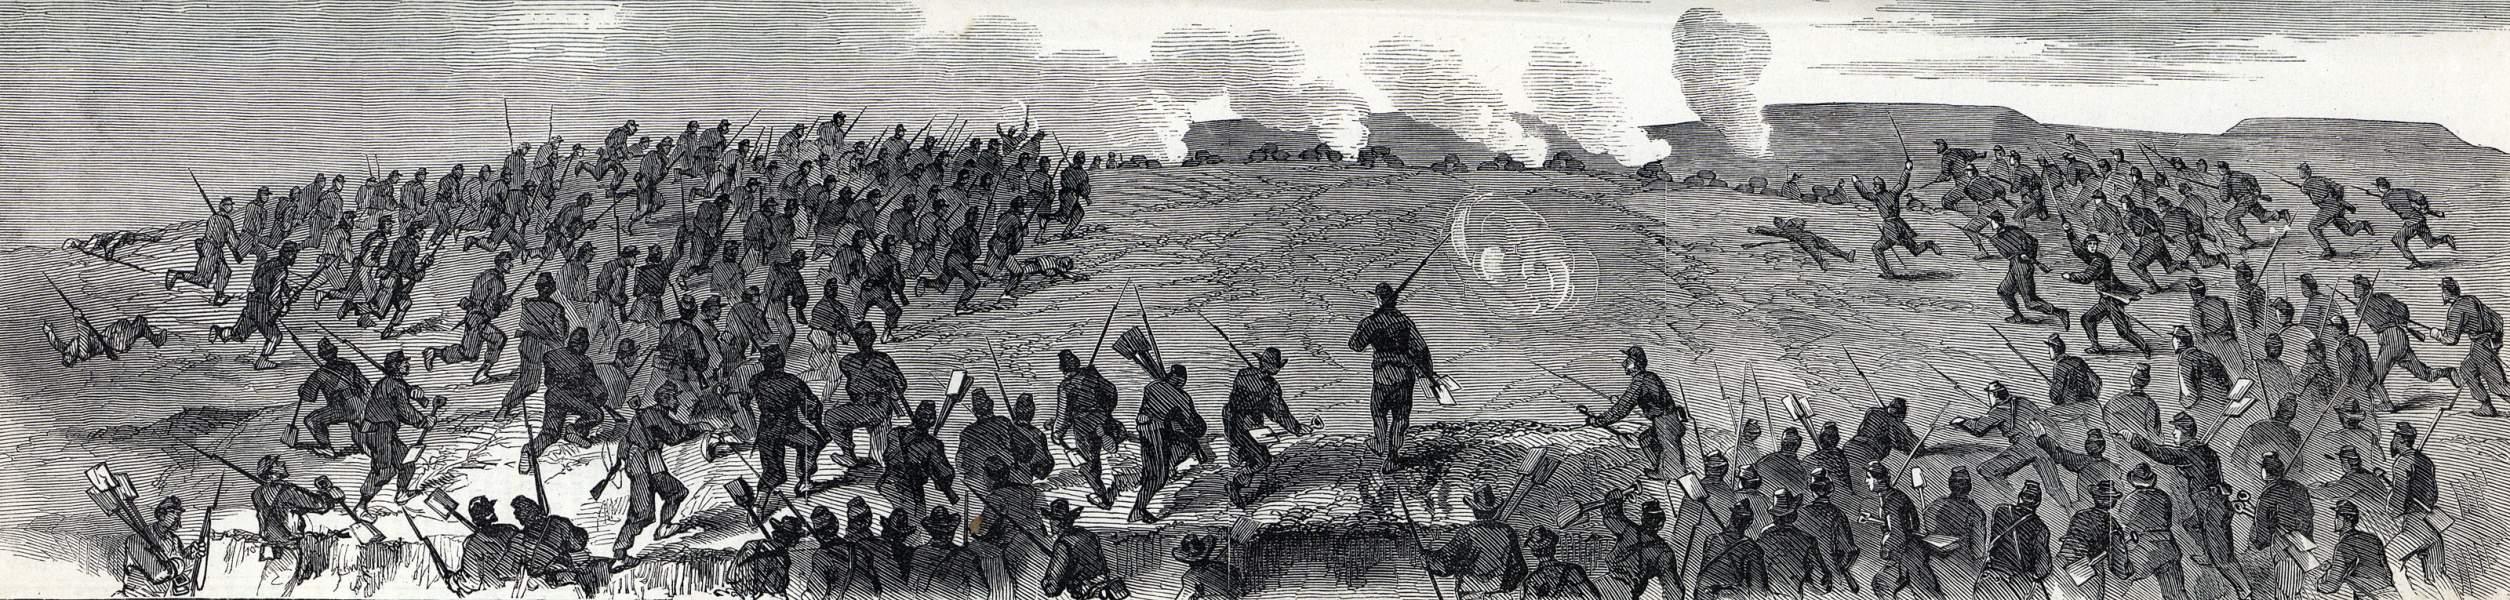 Union assault on the rifle pits in front of Fort Wagner, South Carolina, August 26, 1863, artist's impression, zoomable image